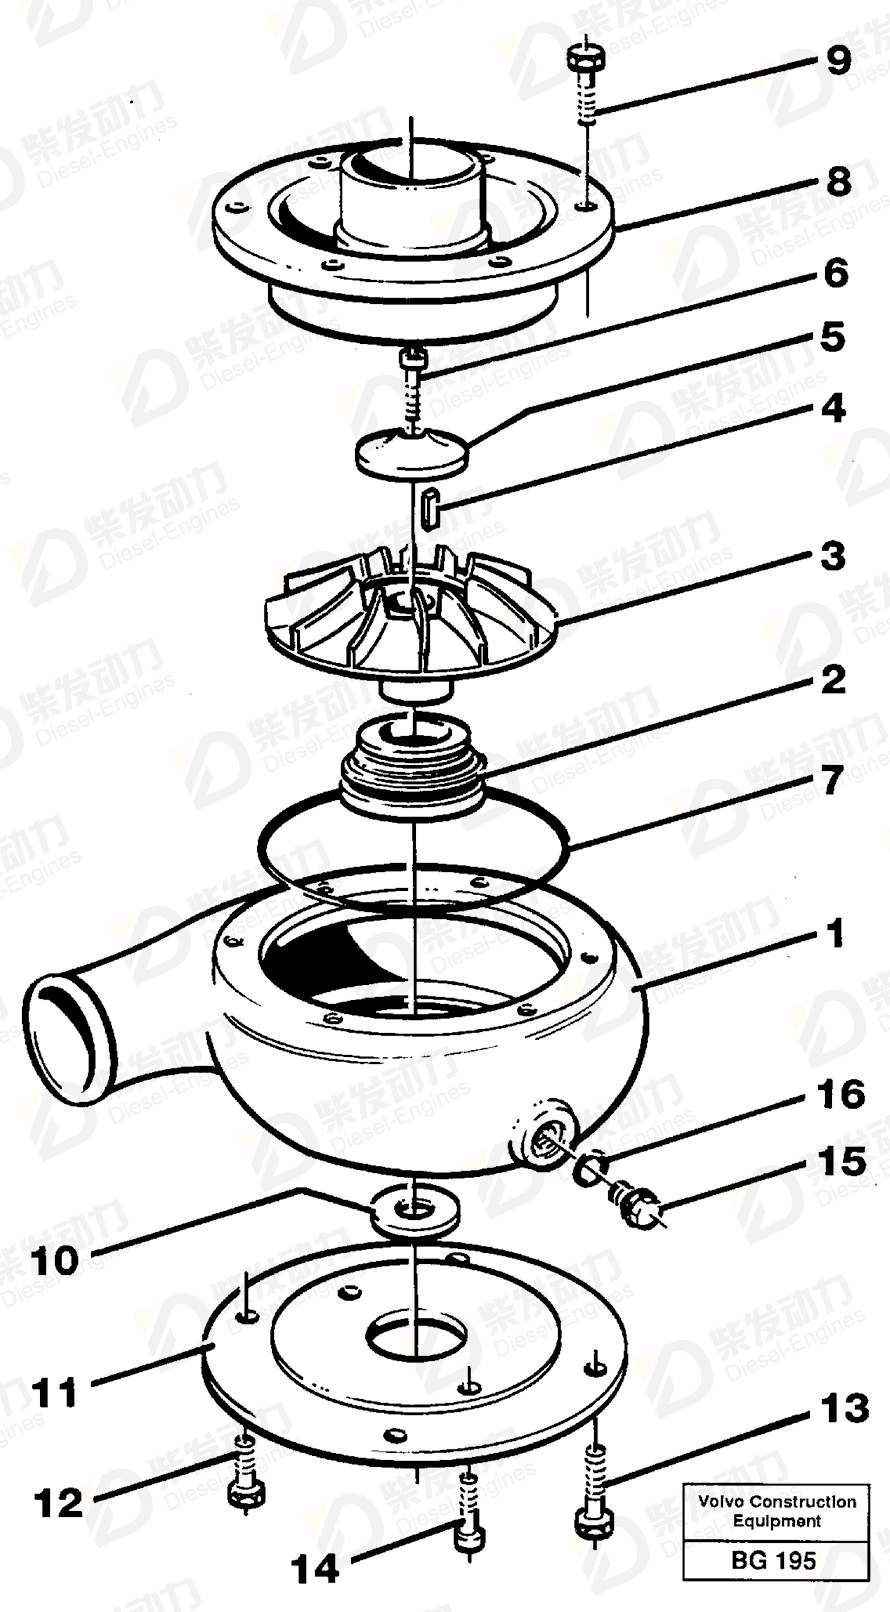 VOLVO Pump cover 11701242 Drawing